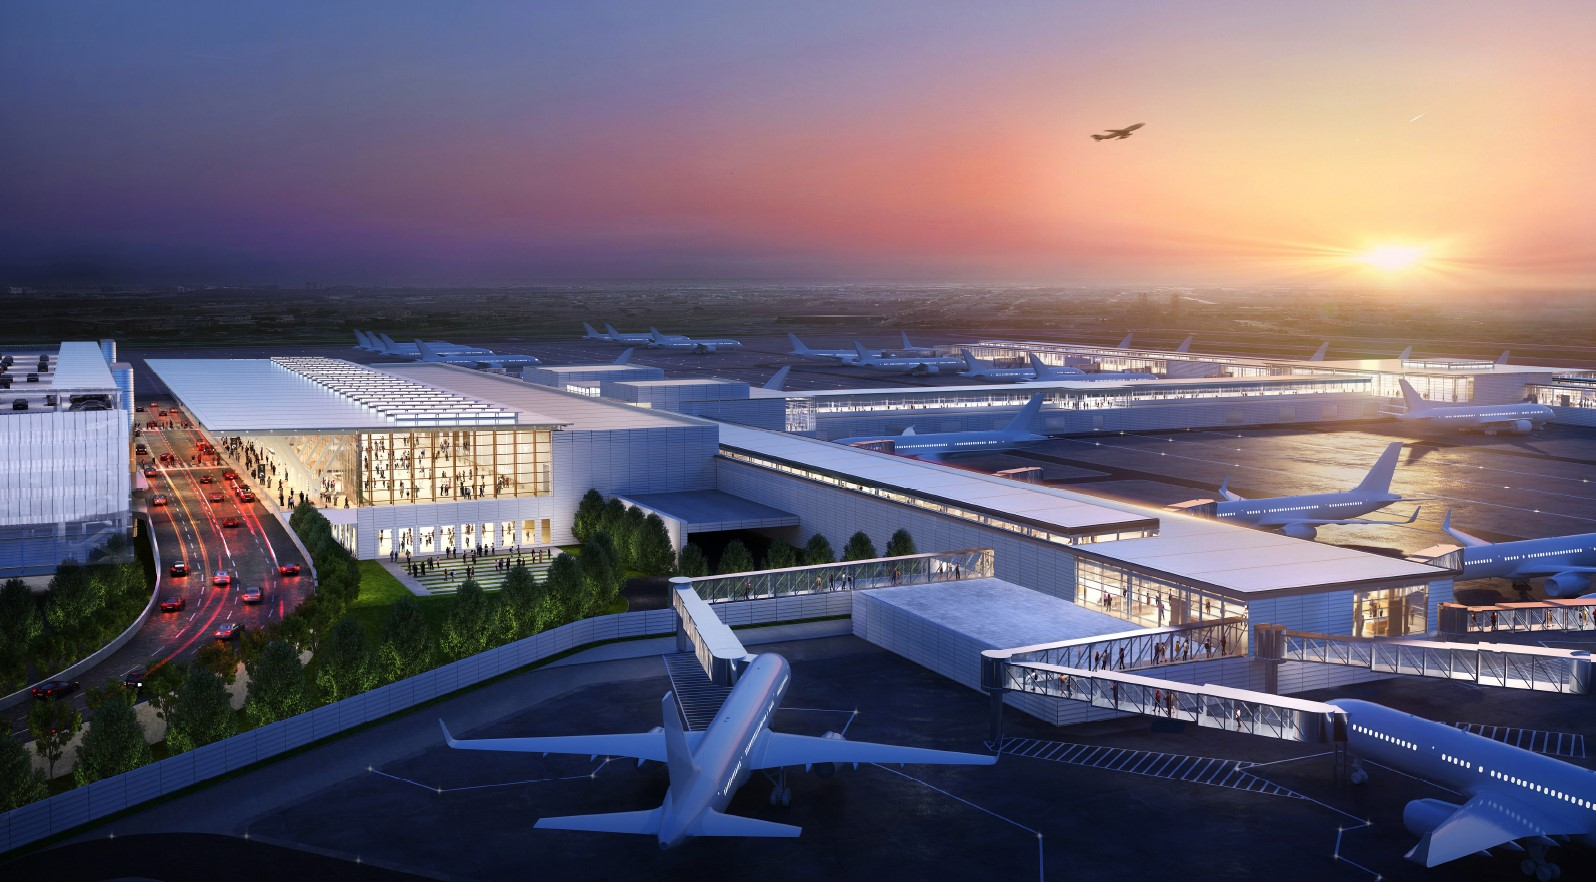 Landing in spring 2023, the Kansas City Aviation Department will open a new single terminal representing a total transformation of Kansas City’s air passenger experience.